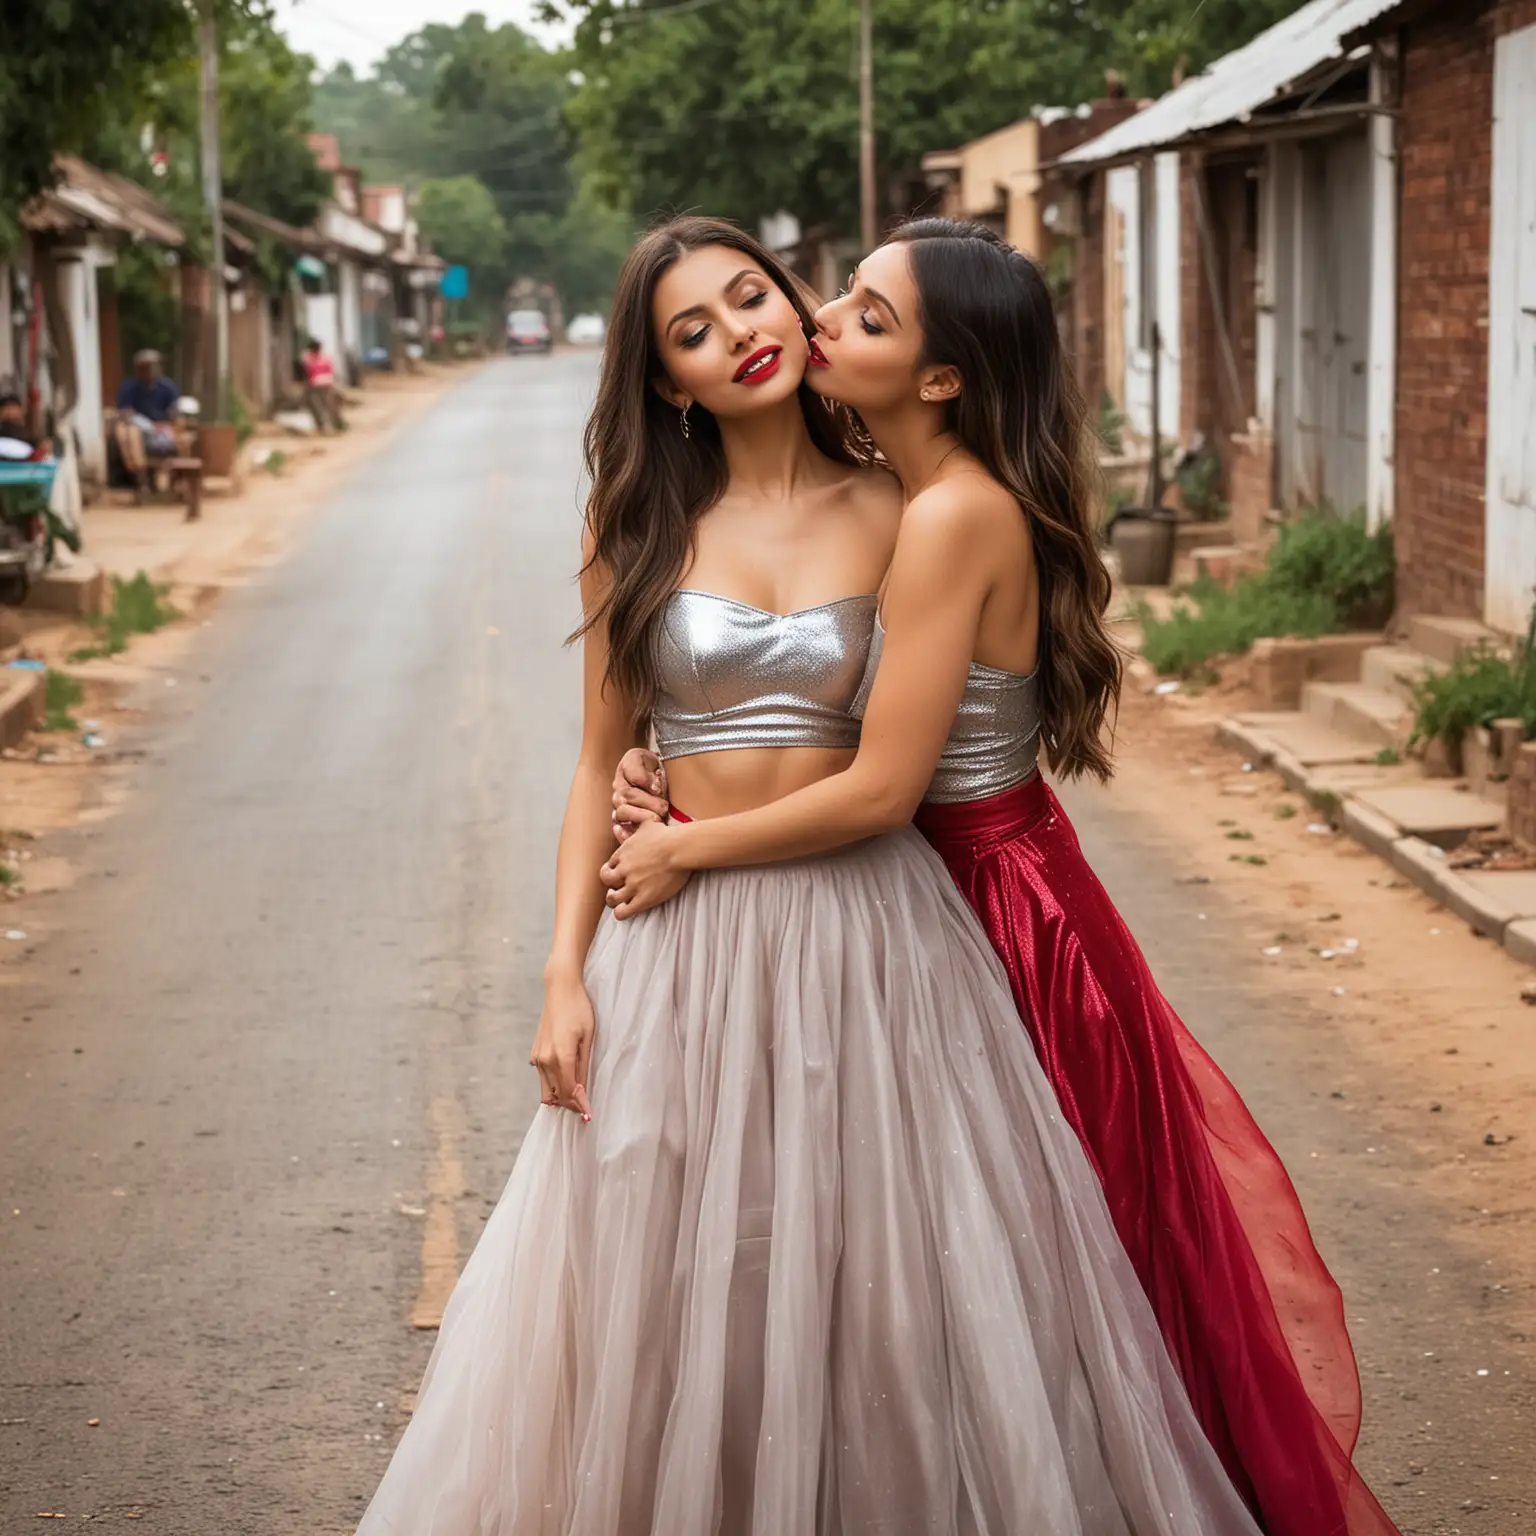 Flash photography, ISO-100 f/32 shot. Remote, poor Haryana village busy street. Victoria Justice, Madison Reed & Ariana Grande wearing shiny slinky flowy silky chiffon satiny metallic skirts, red glossy lipstick & lots of makeup kissing & pouting.